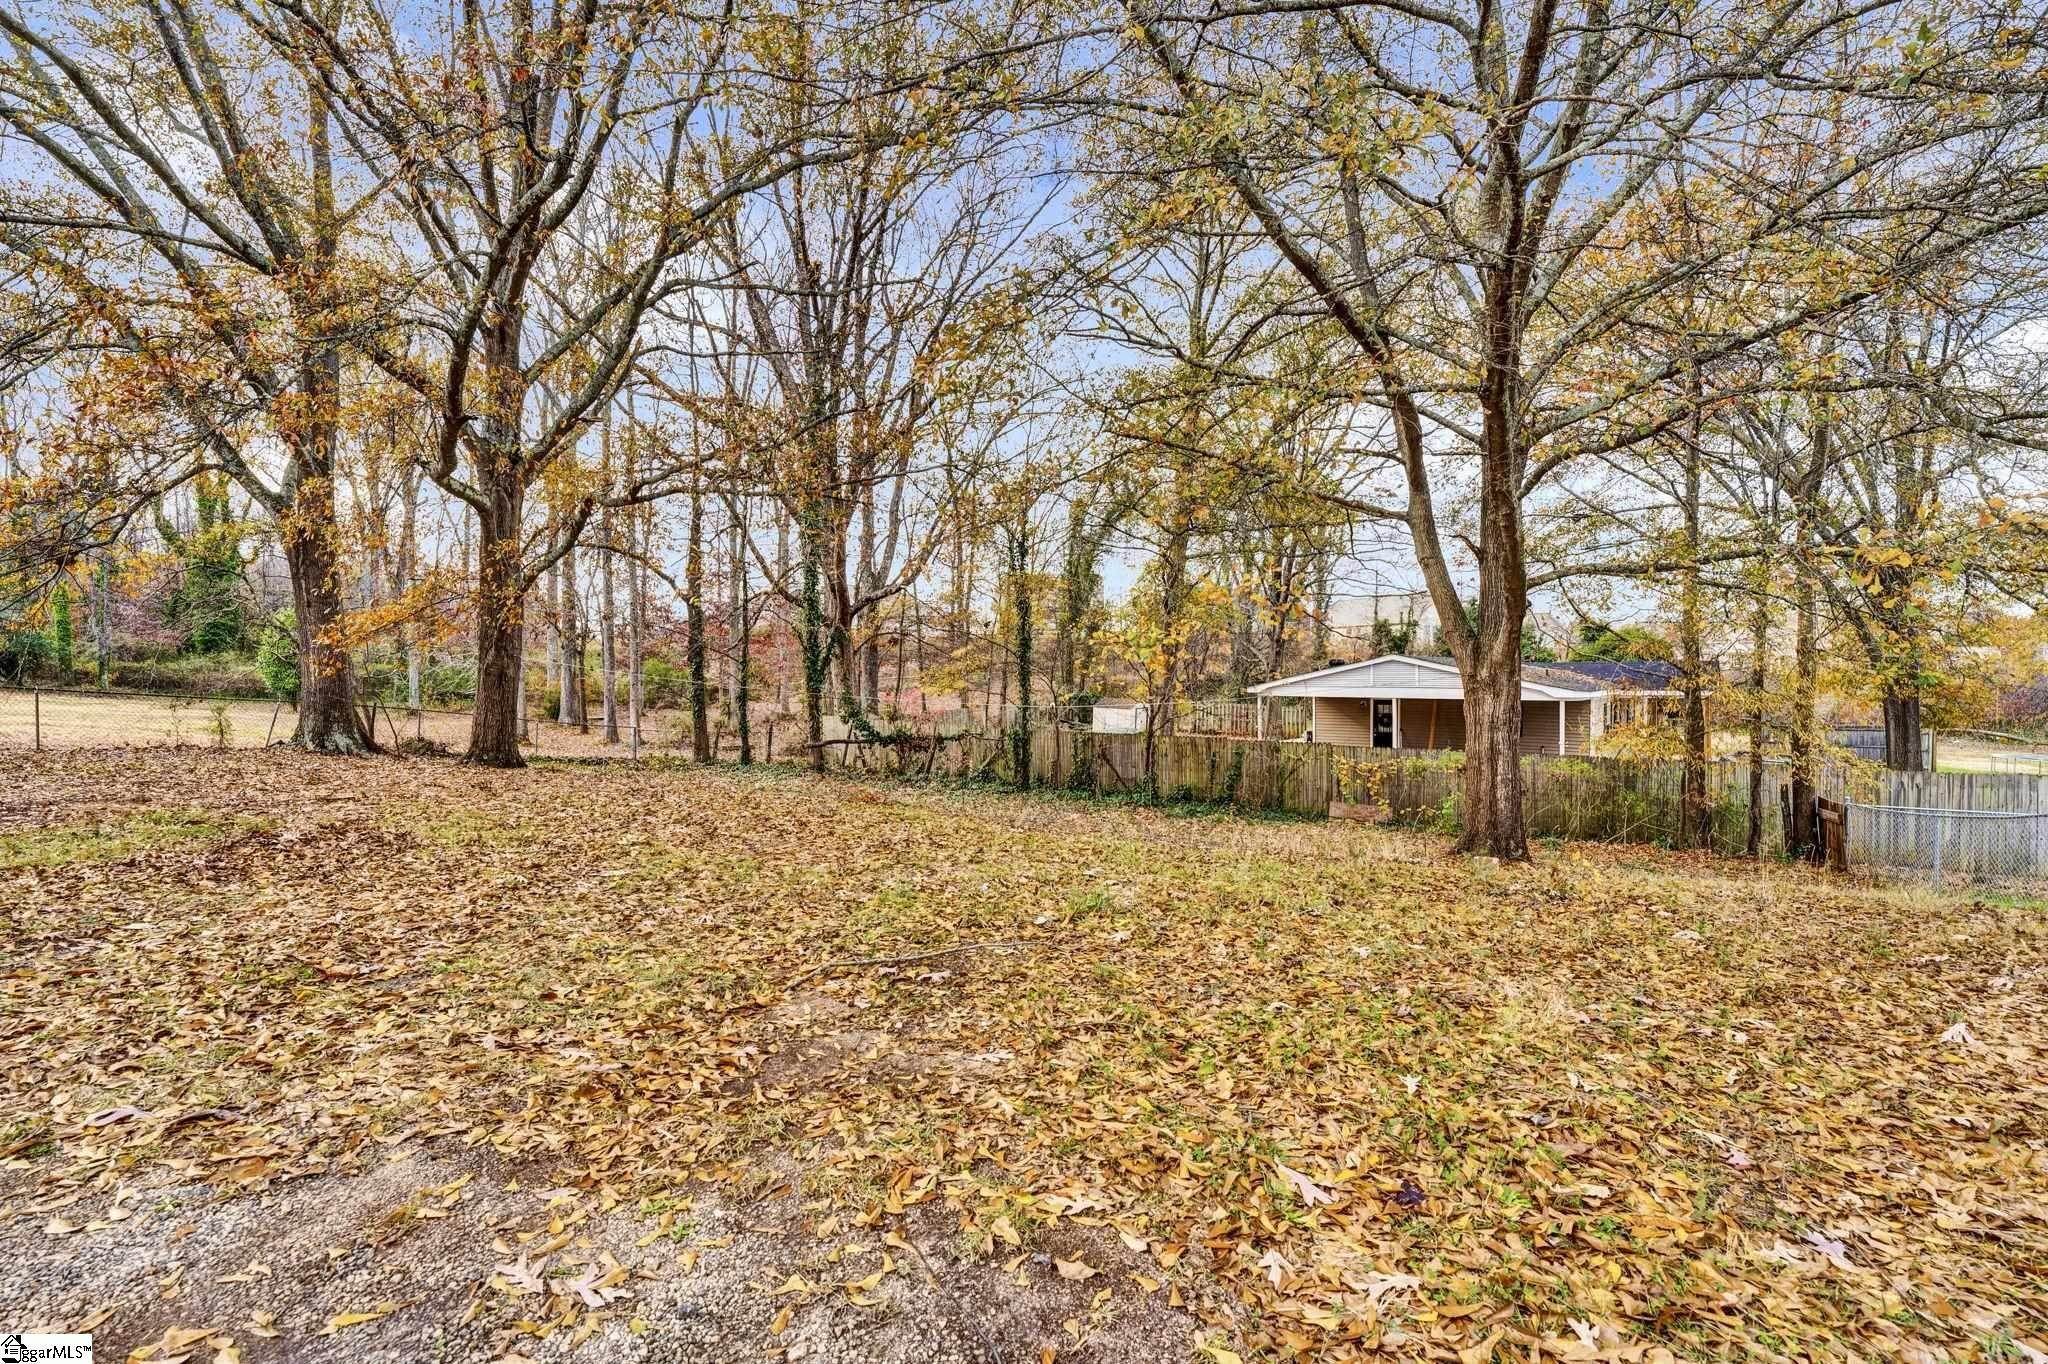 33. Single Family for Sale at Greenville, SC 29617